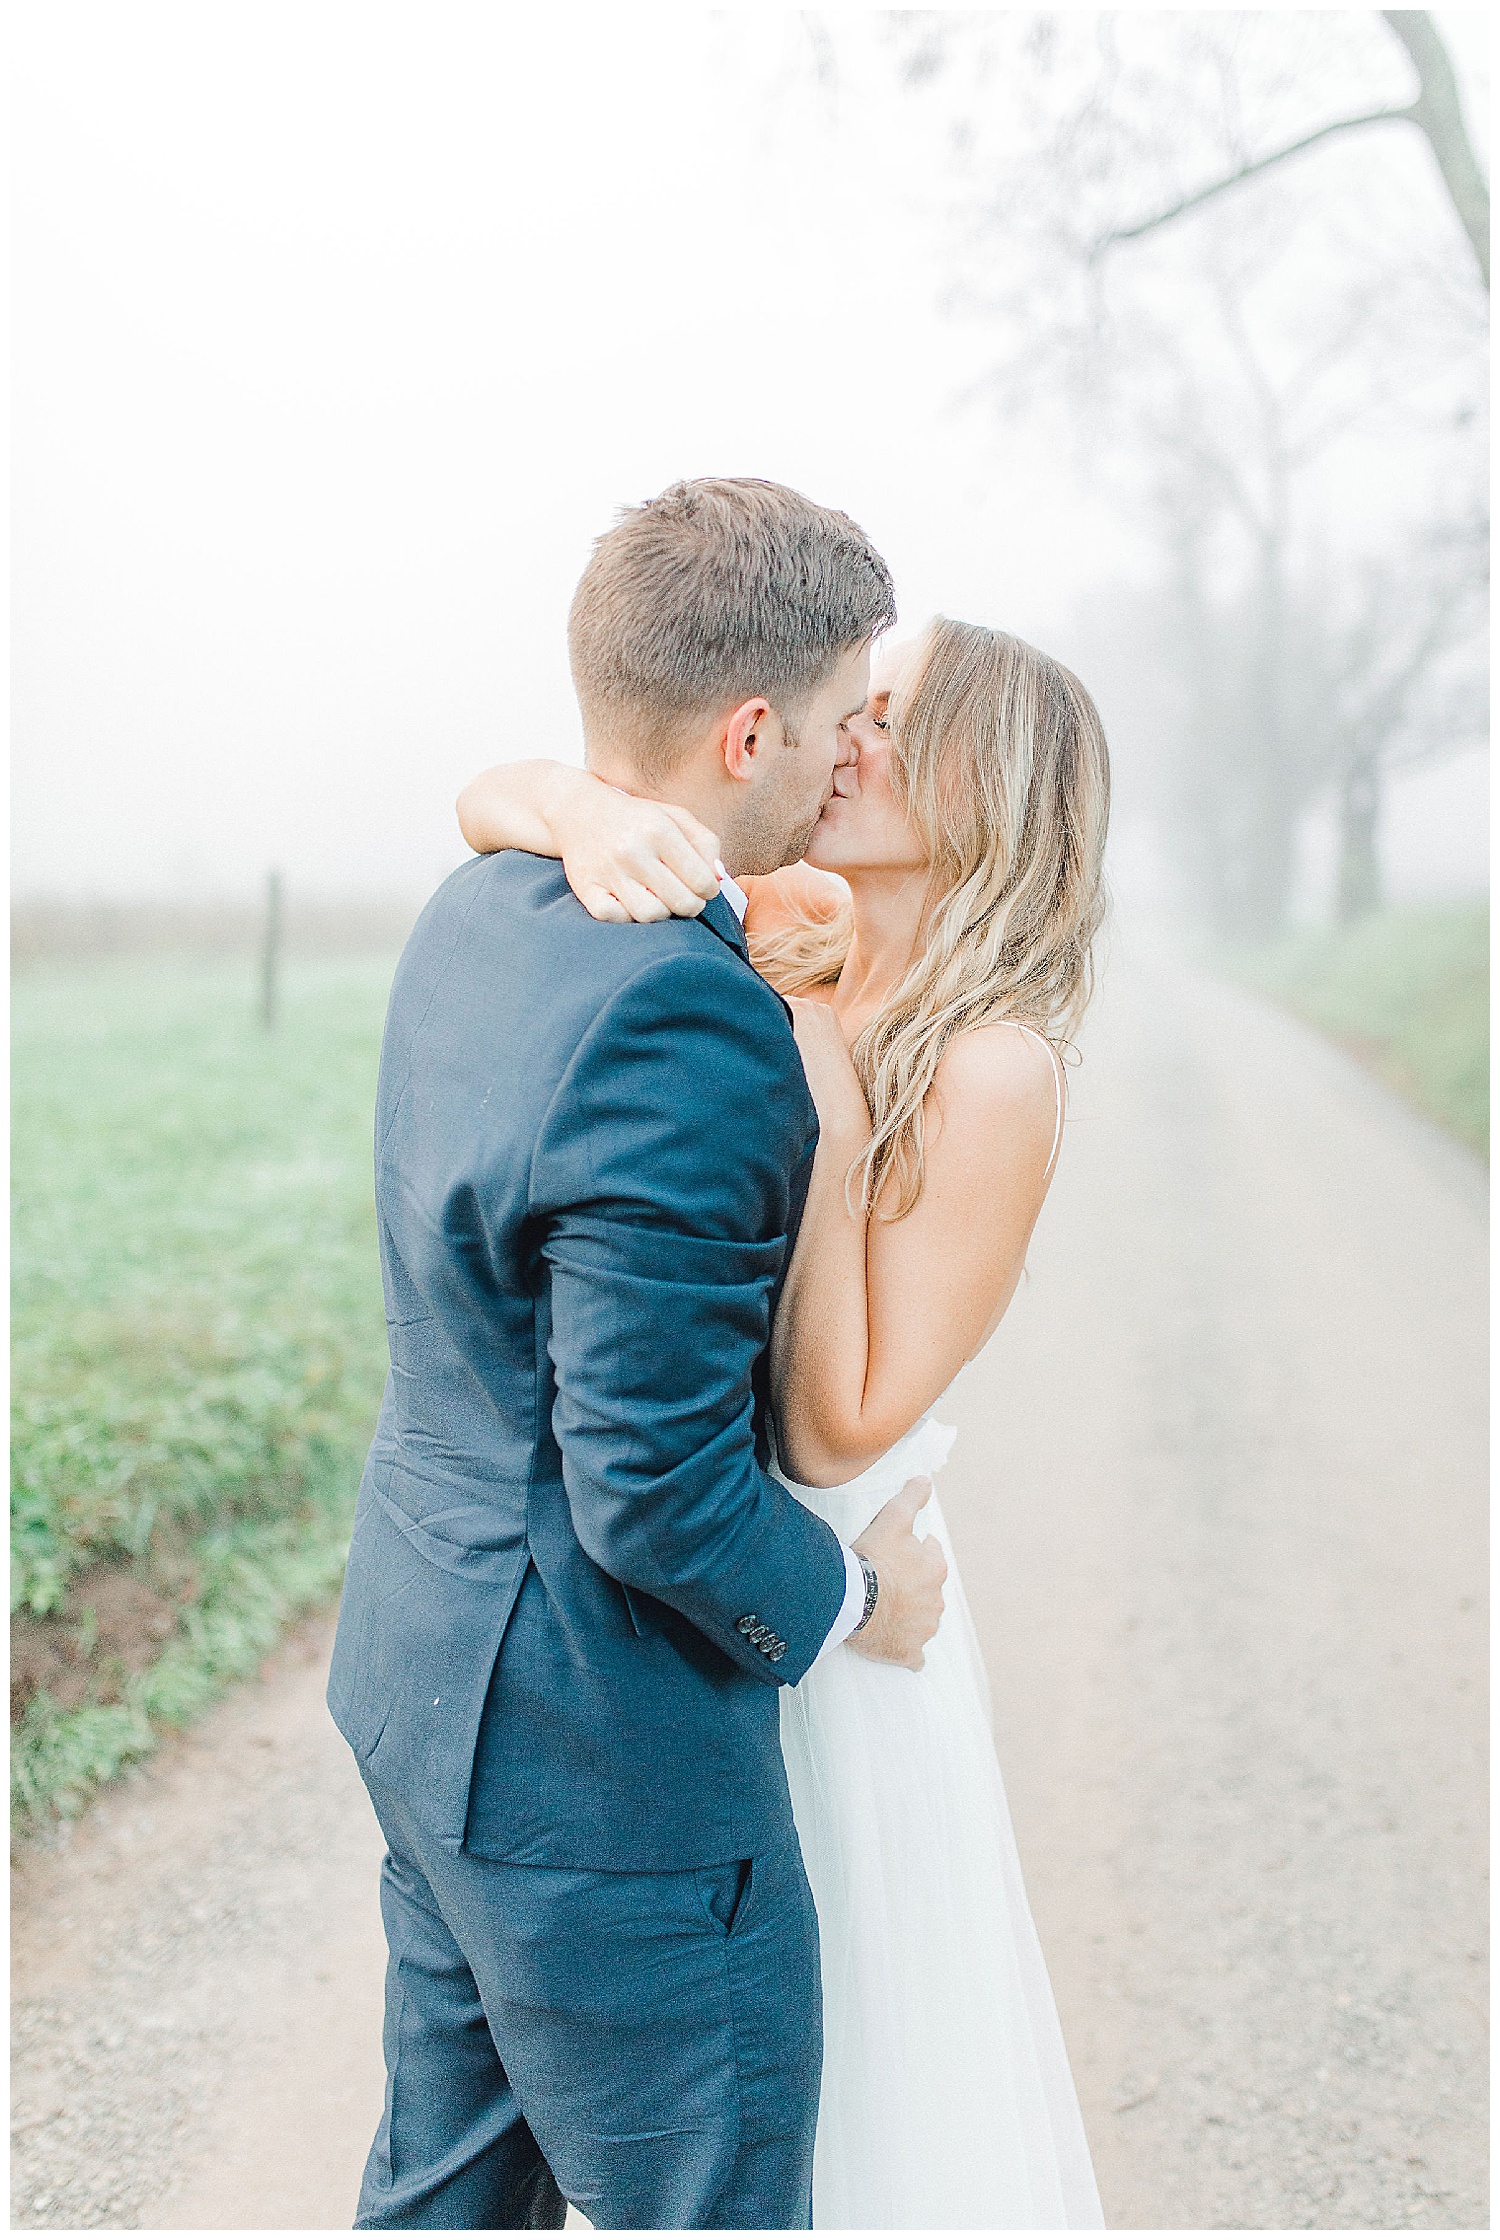 Emma Rose Company recently got to travel all the way to Nashville to photograph the most beautiful post-wedding bride and groom portraits in the Great Smoky Mountains with a gorgeous couple! Nashville wedding inspiration at it's finest._0003.jpg